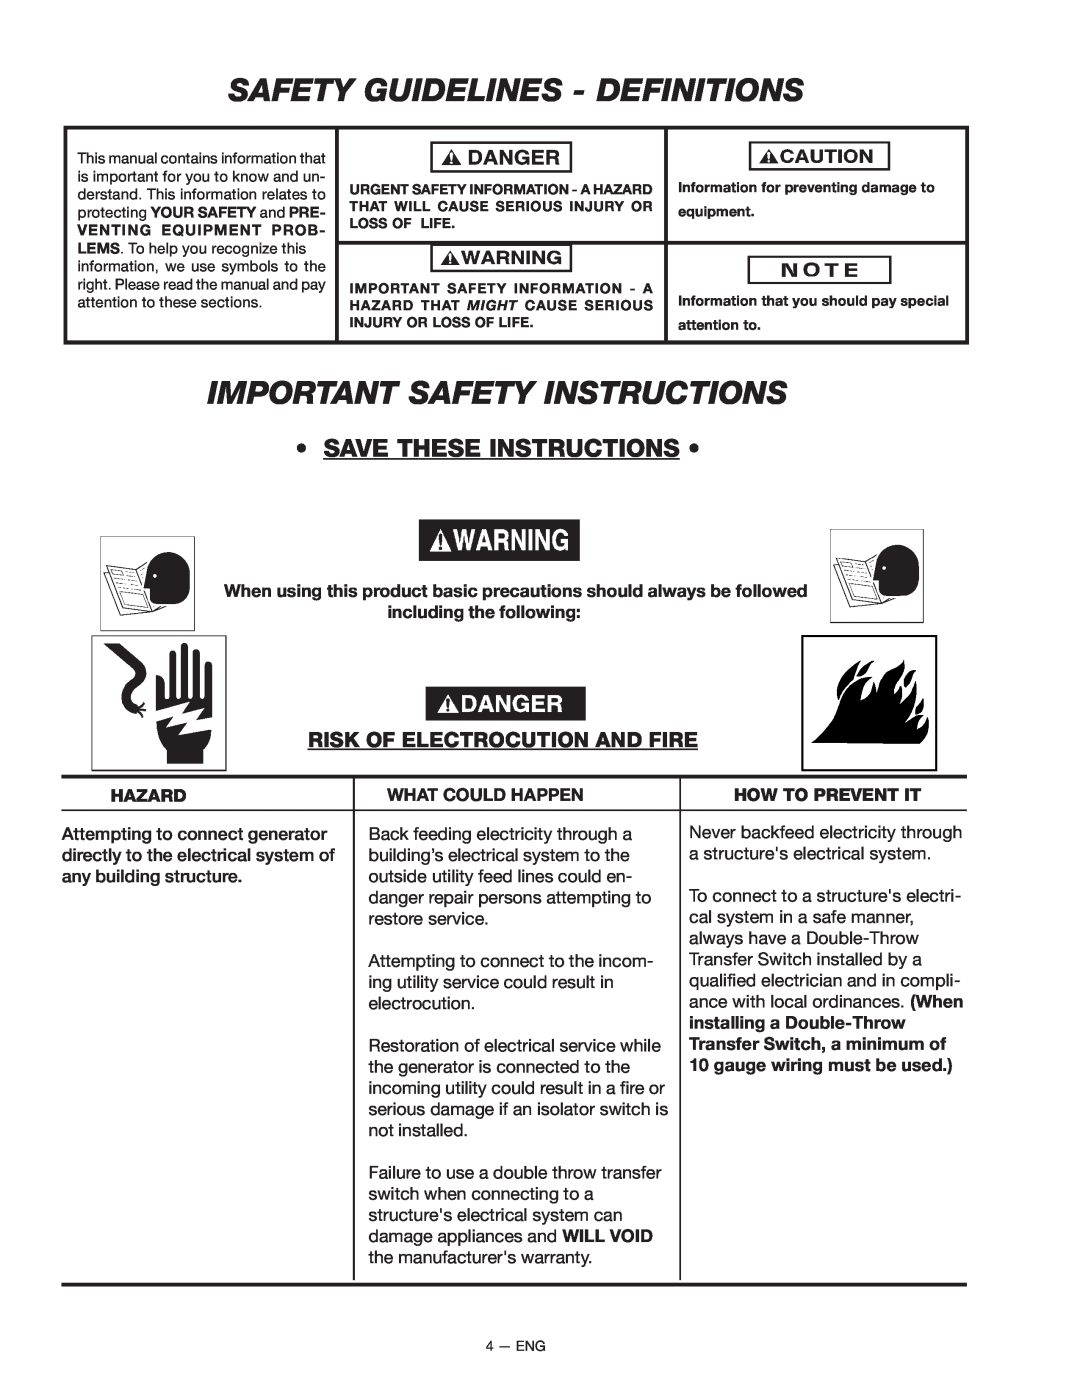 Porter-Cable T525, CTE300, BS600 Safety Guidelines - Definitions, Important Safety Instructions, Save These Instructions 